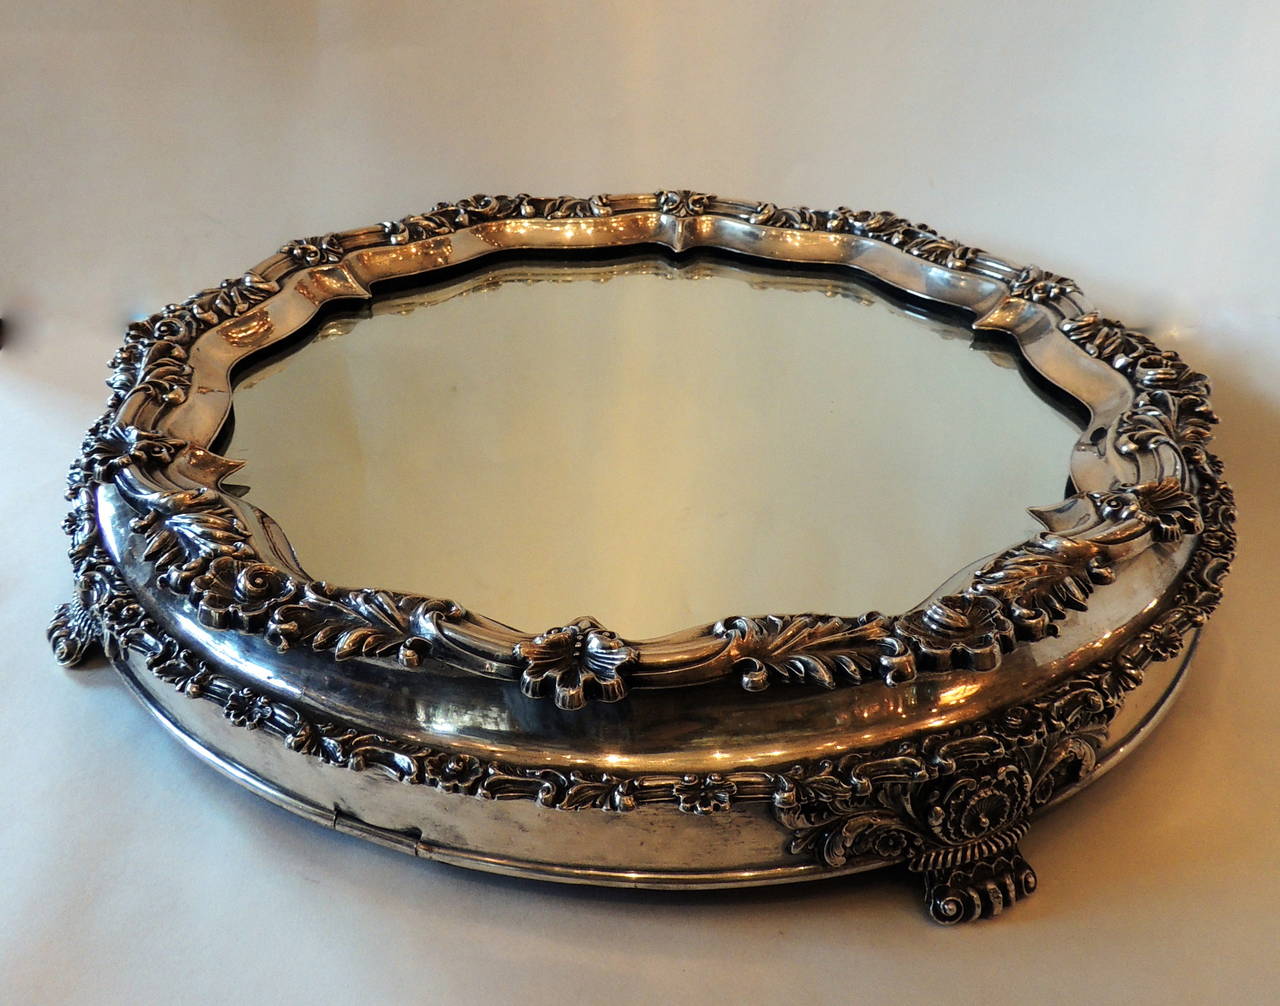 Wonderful 19th century silver plate plateau has a rich floral embellishment with circular mirror. The beautiful patina adds to the look of this antique plateau.
Original numbered feet and attachments are on the bottom. 

Measures: 17